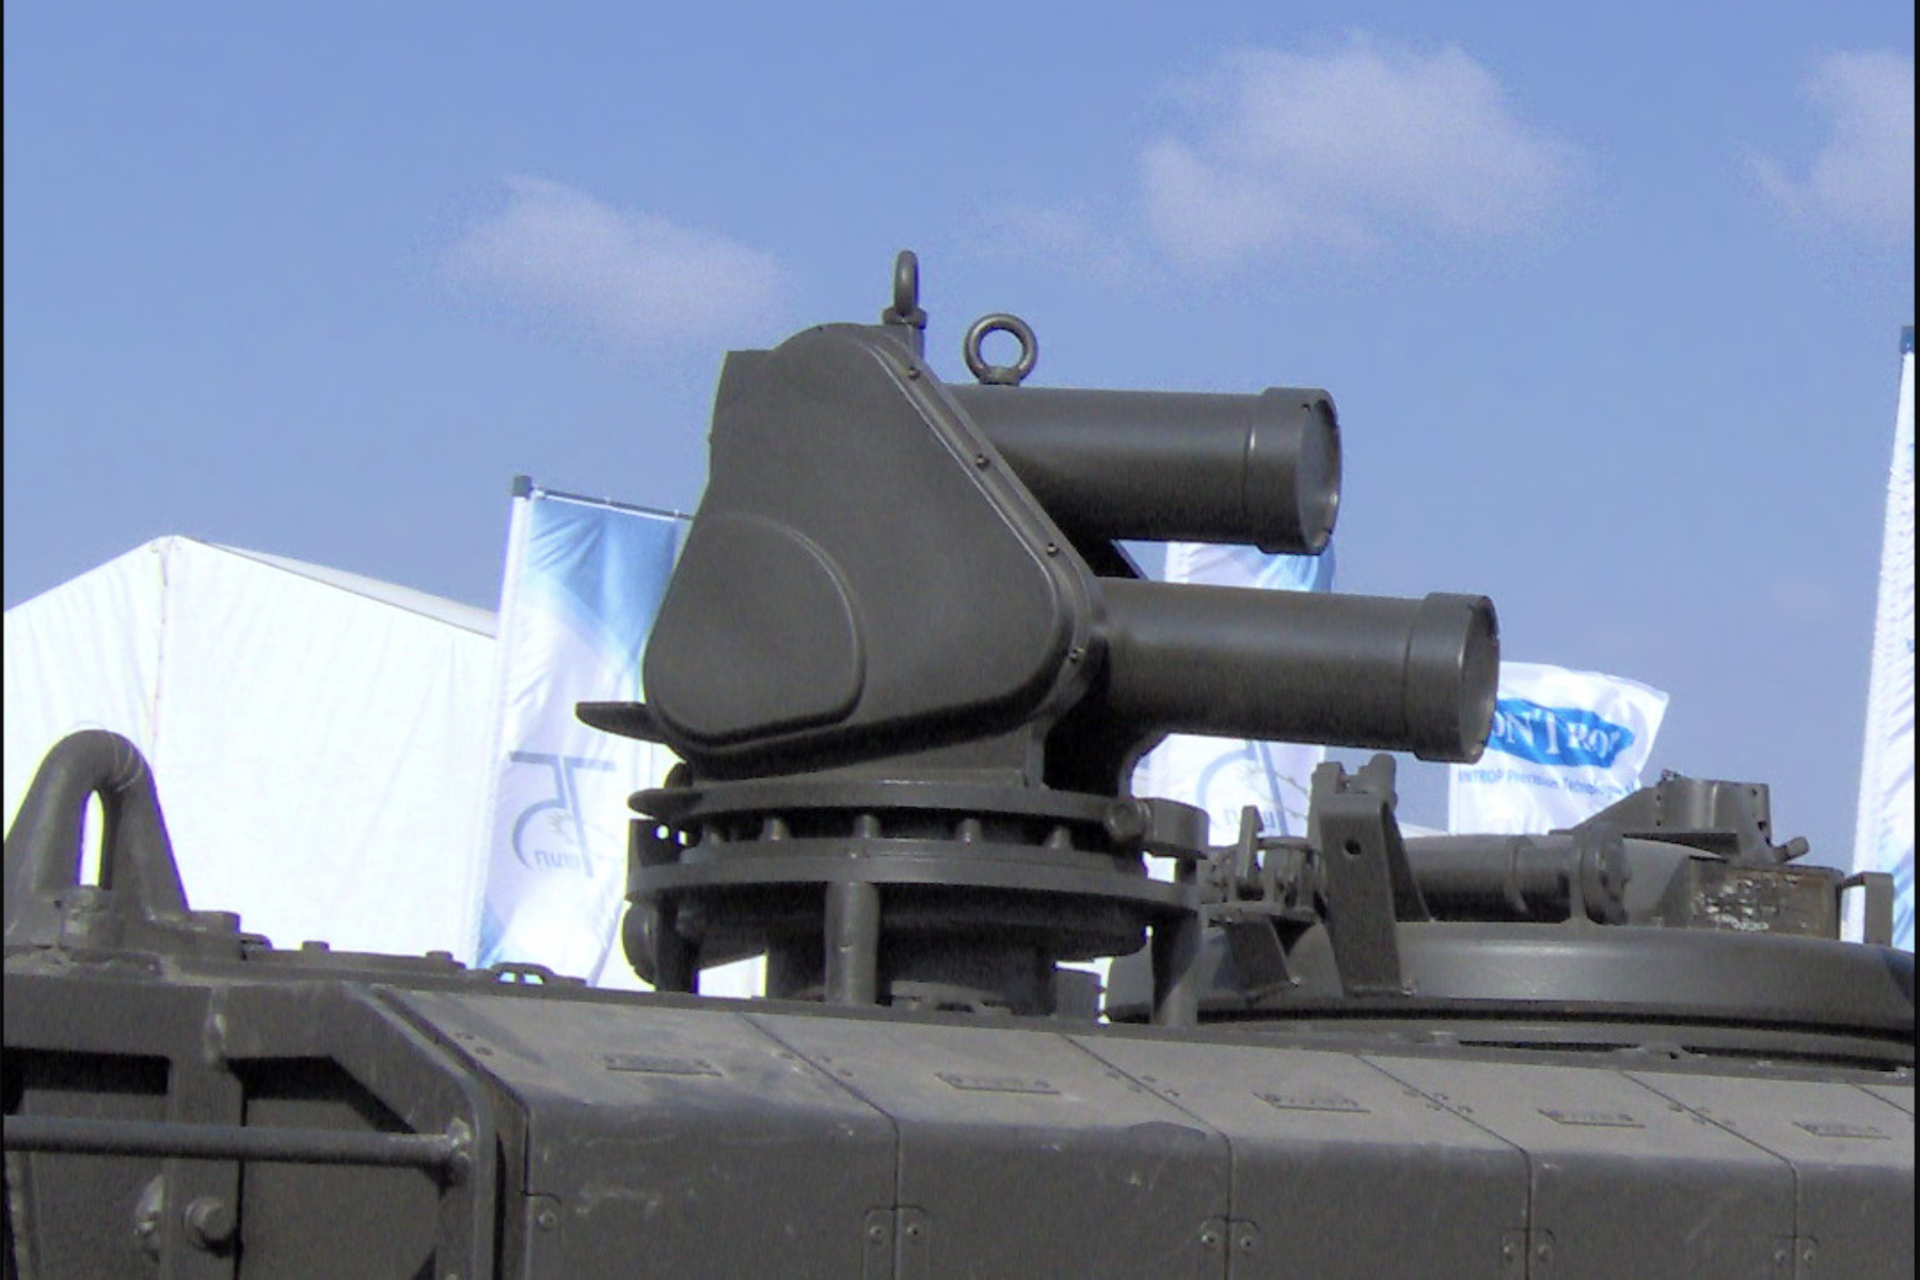 Iron Fist Active Protection System